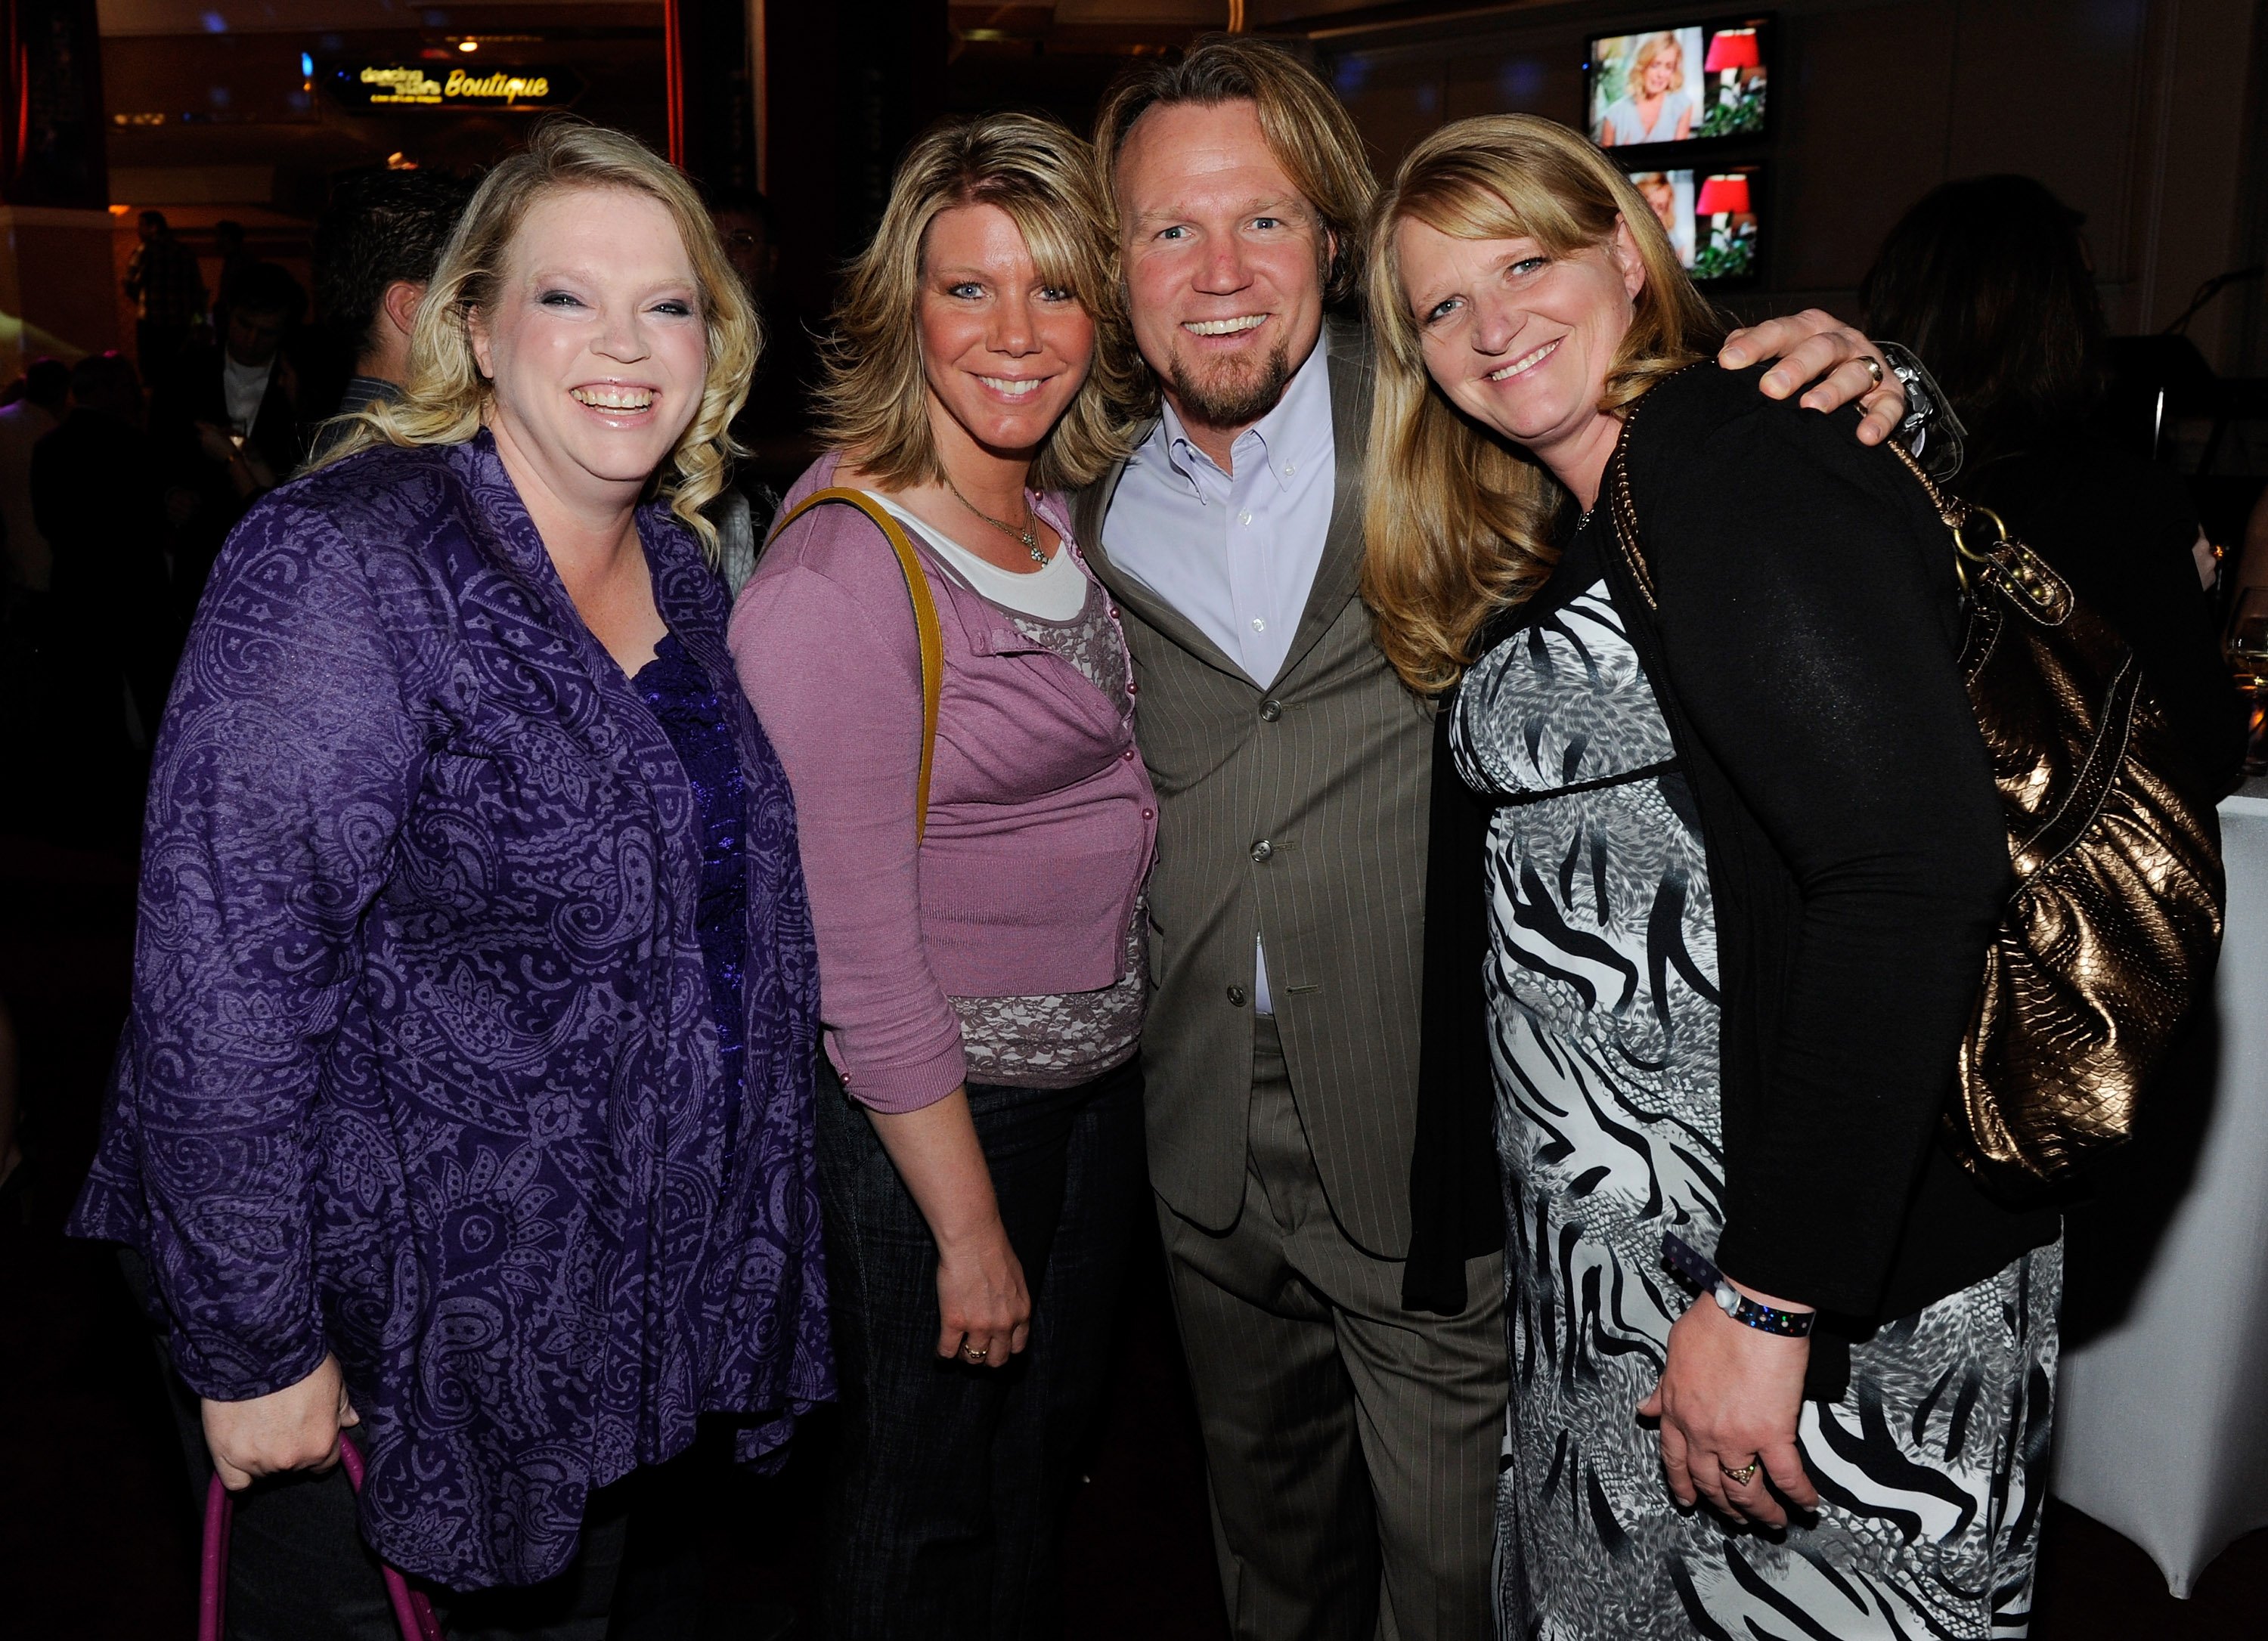 Janelle Brown, Meri Brown, Kody Brown and Christine Brown attend a show in Las Vegas